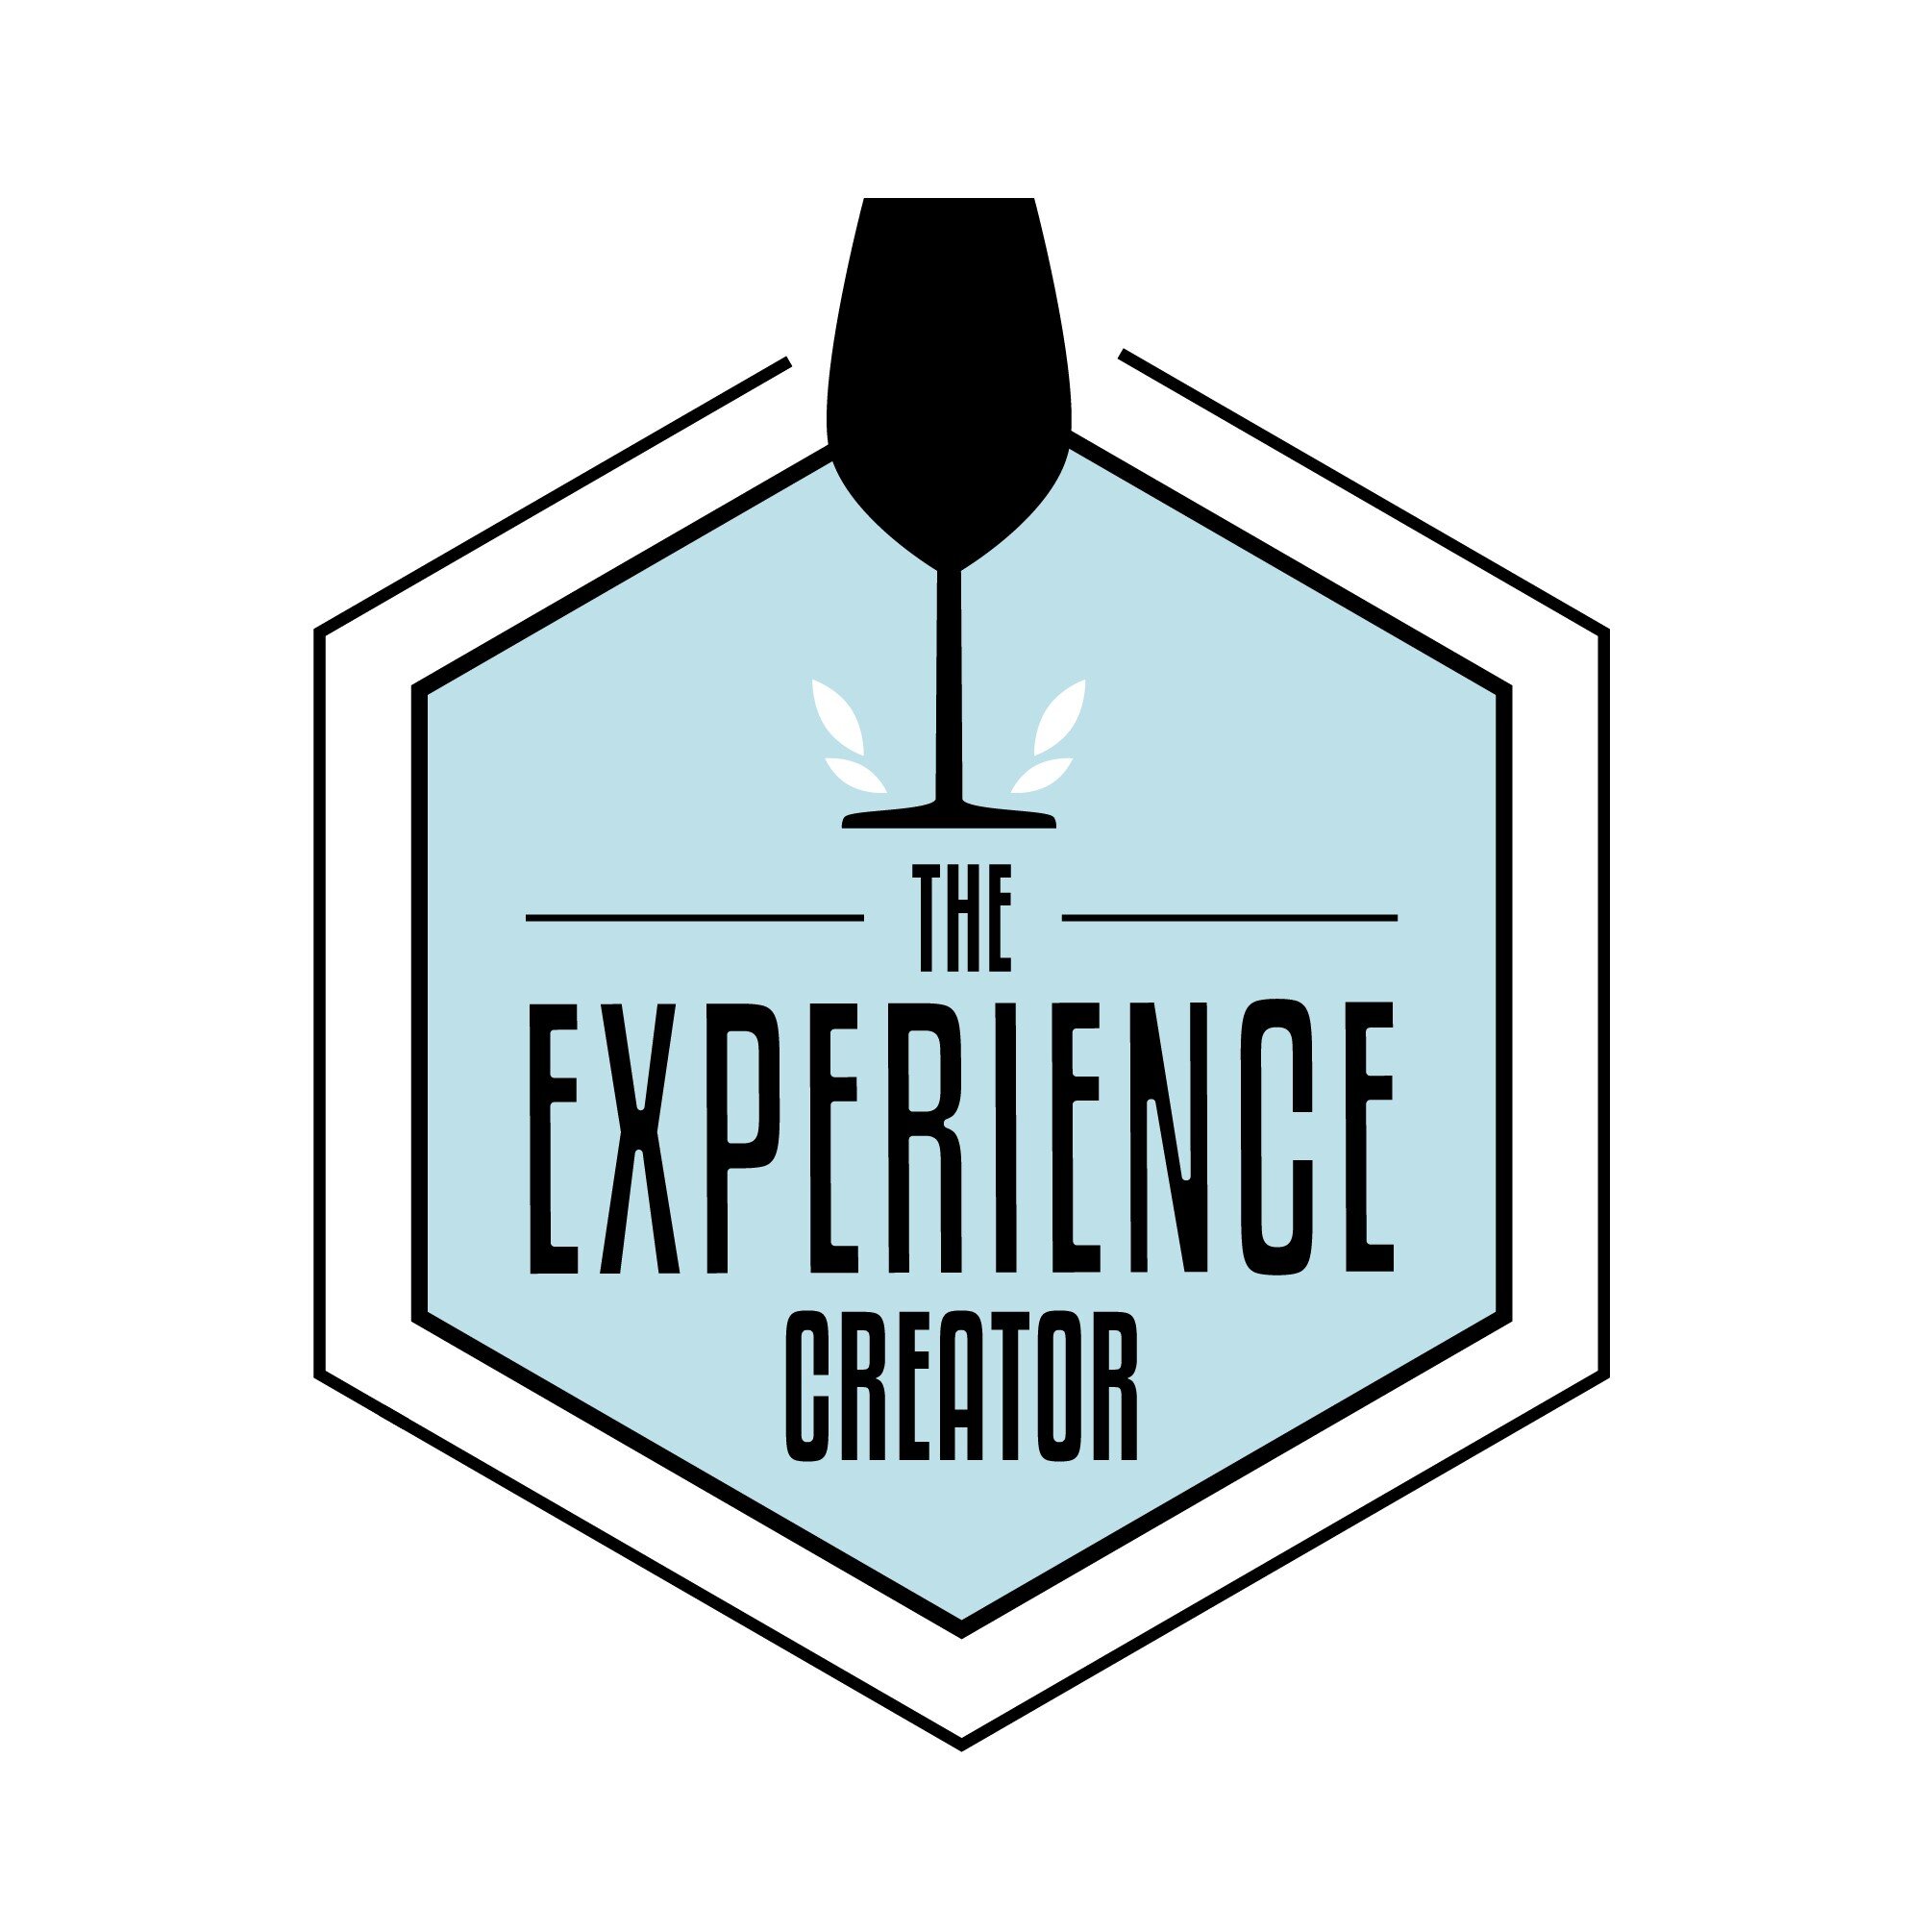 THE EXPERIENCE CREATOR